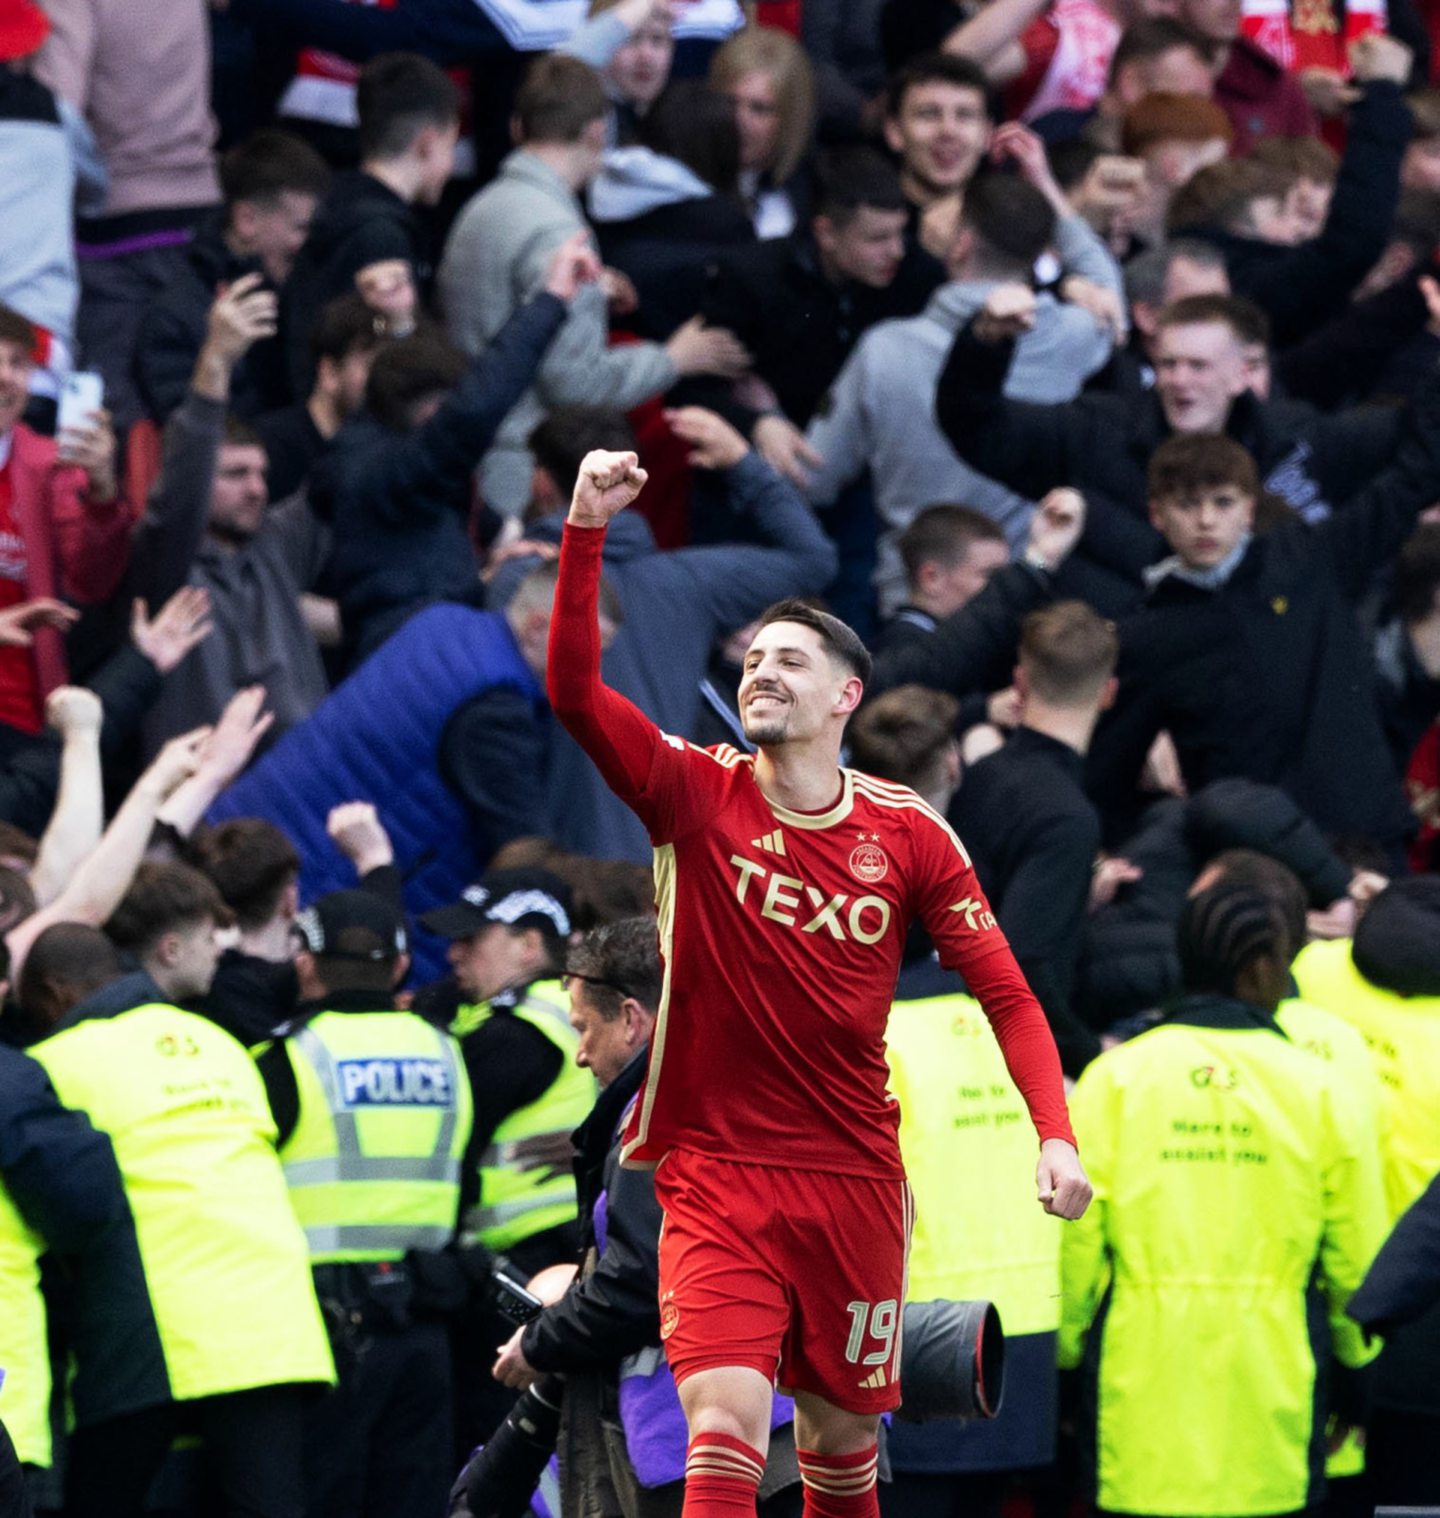 Aberdeen's Ester Sokler celebrates after scoring to make it 2-2 during the Scottish Cup semi-final. Image: SNS